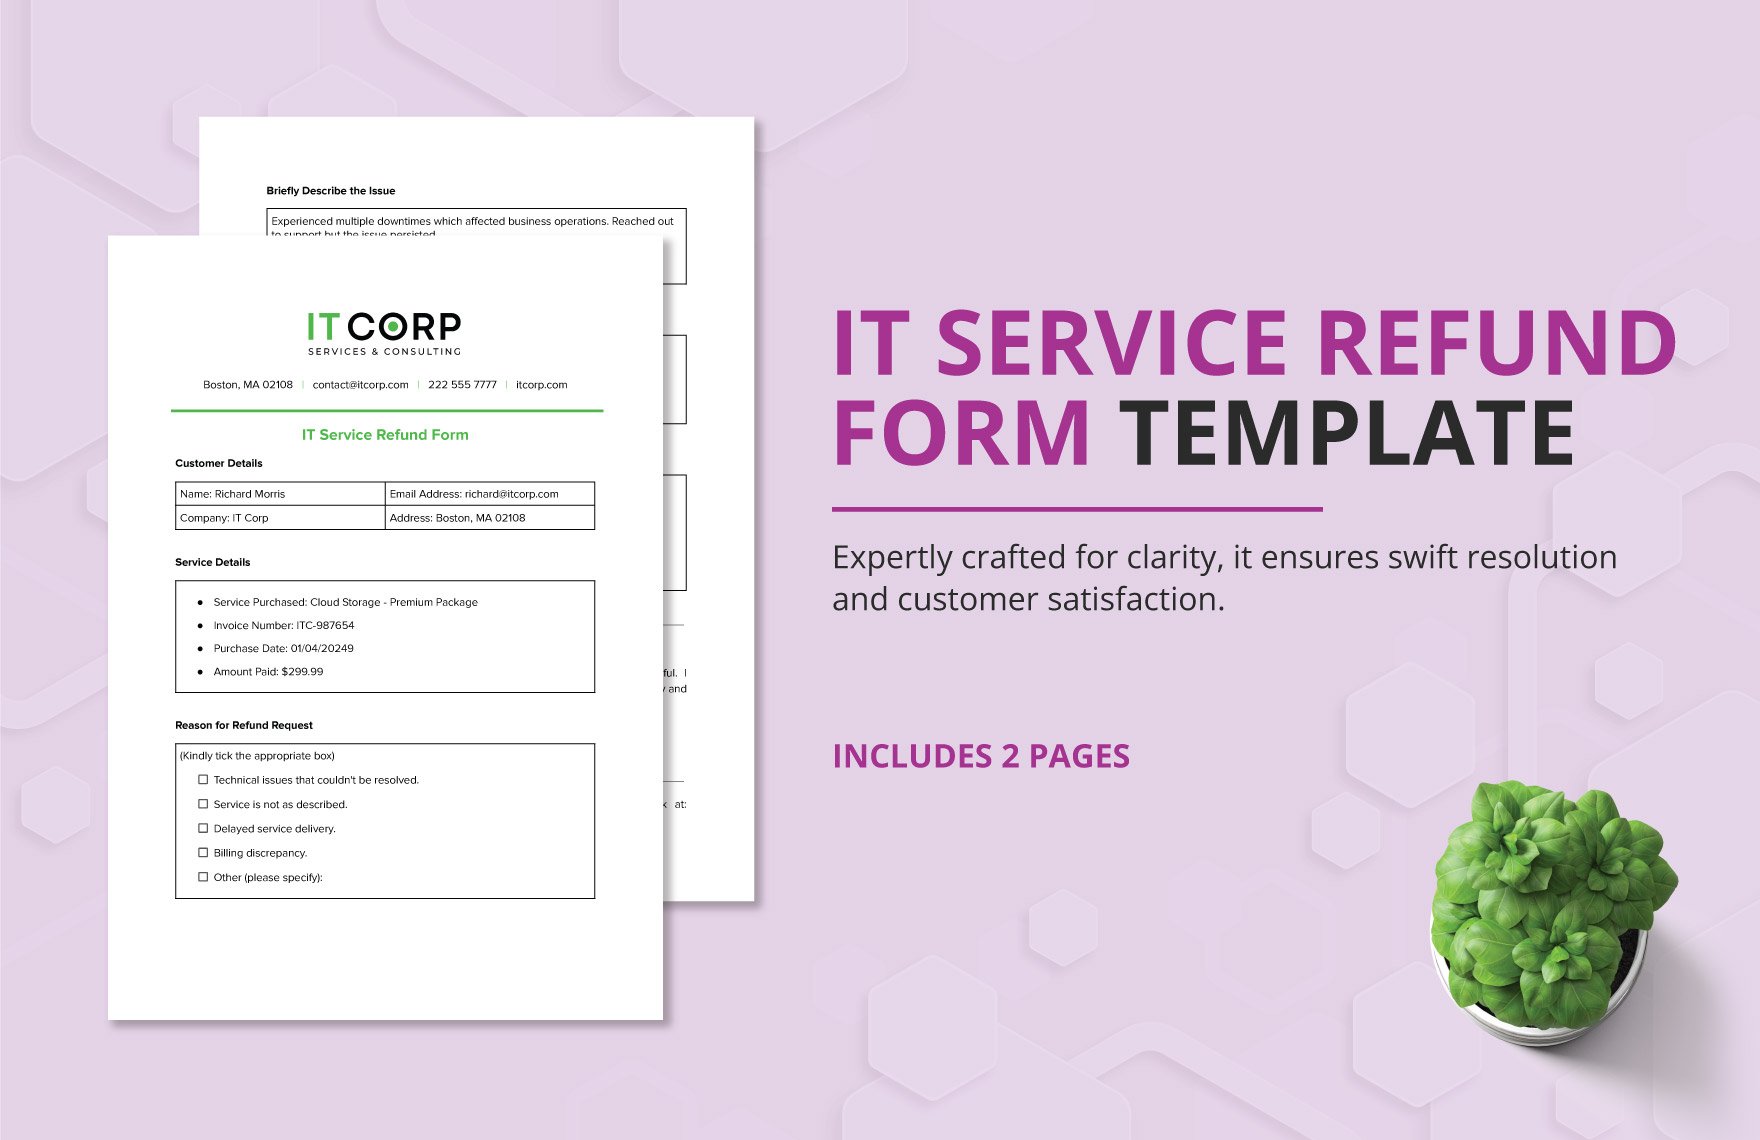 IT Service Refund Form Template